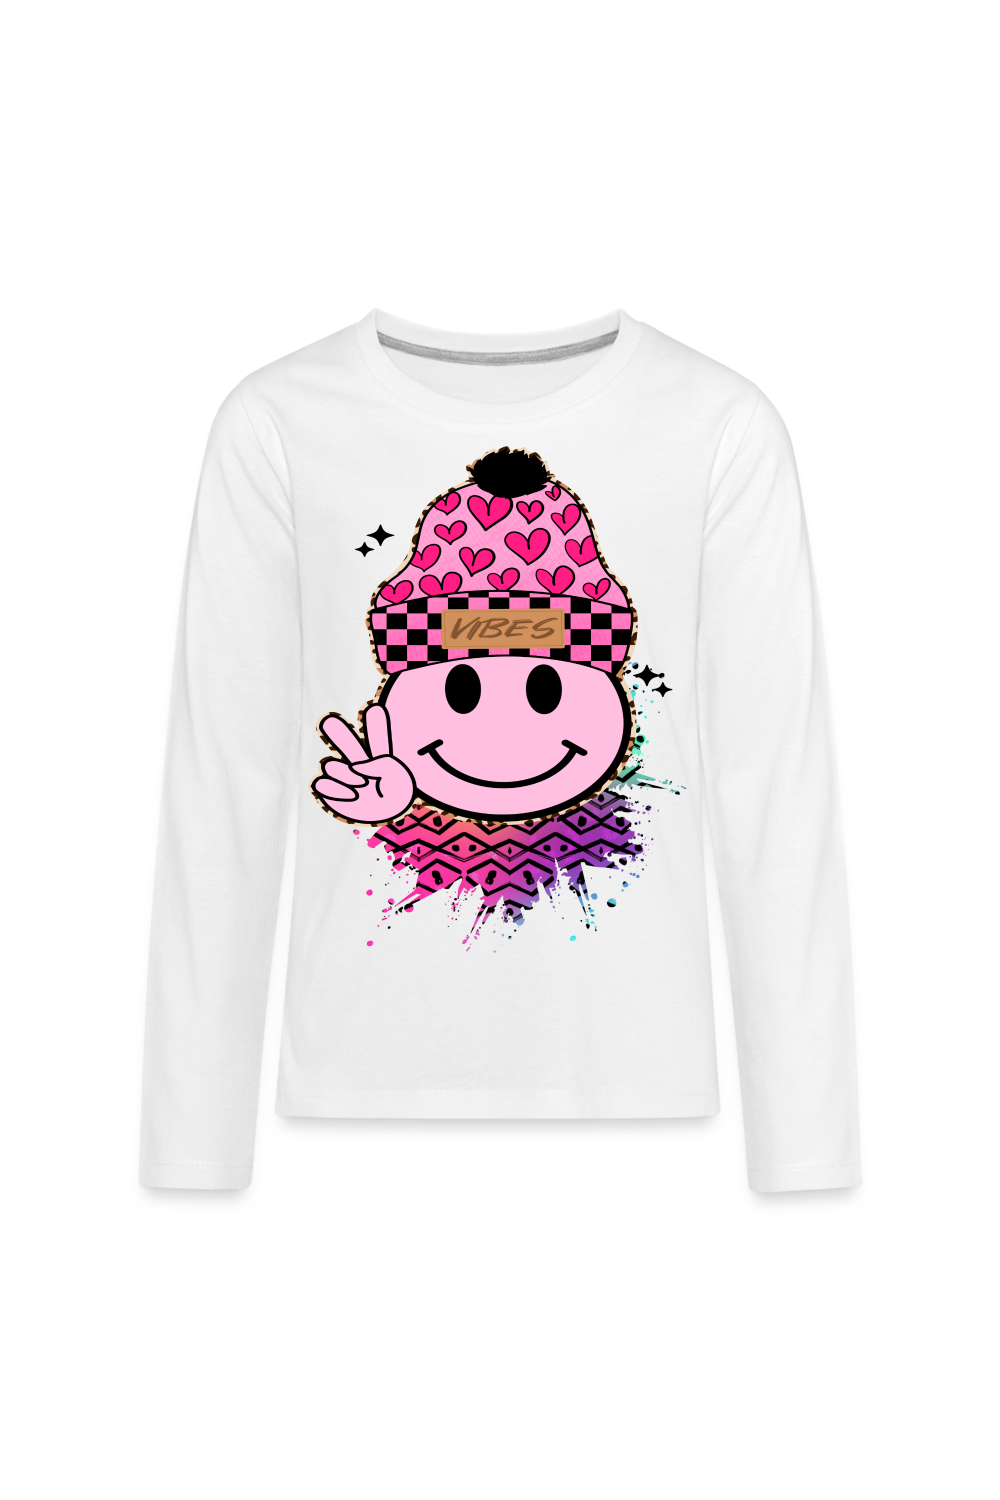 Girls Love Vibes Smiley Face Long Sleeve T-Shirt - white - NicholesGifts.online